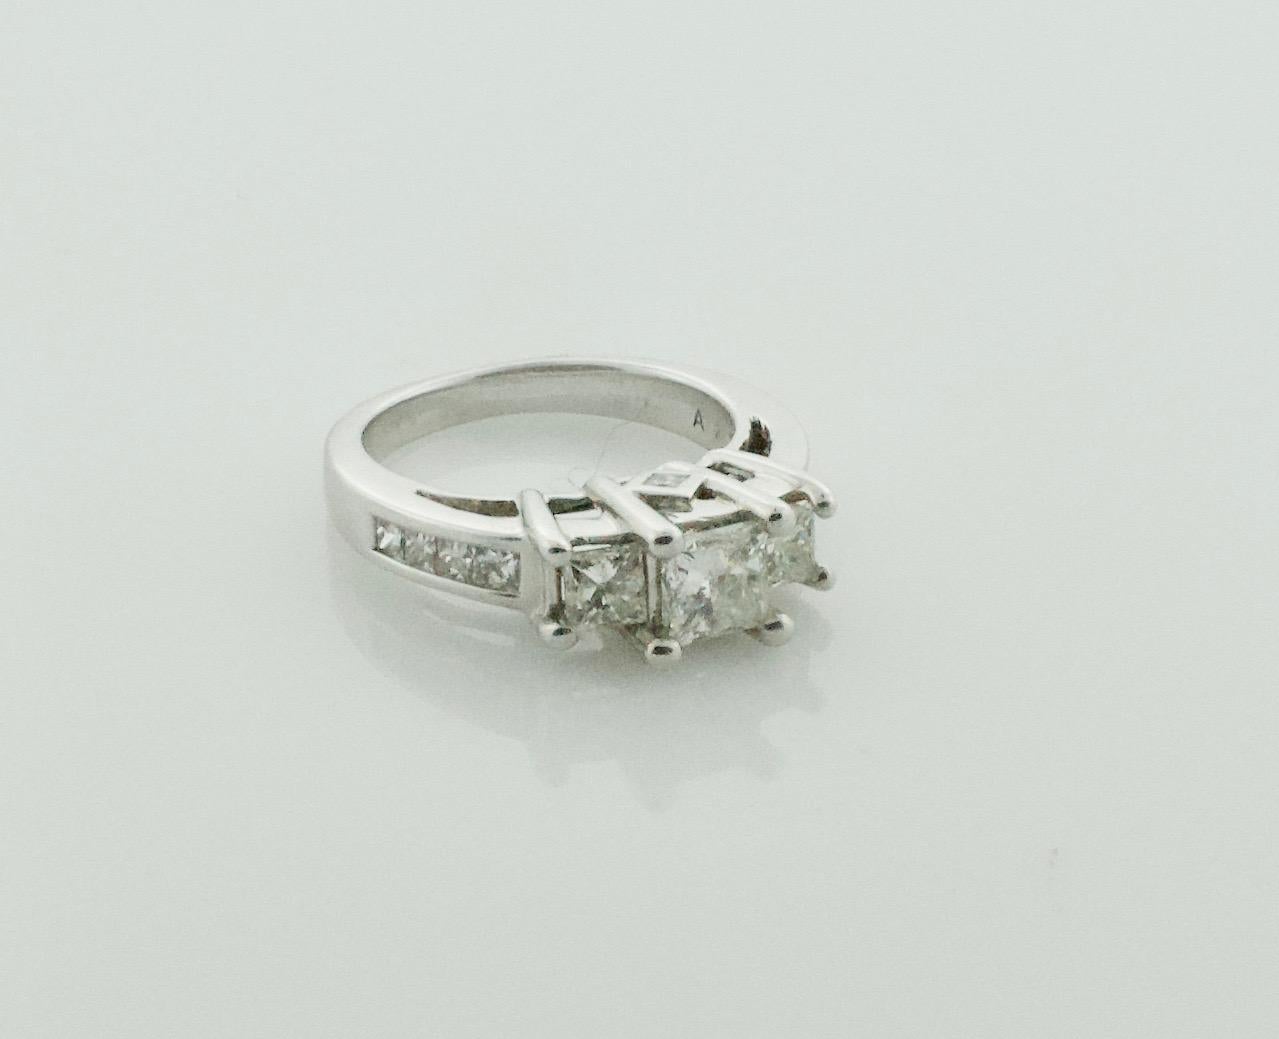 One Princess Cut Diamond Weighing .55 Carats Approximately GHI SI [bright with no imperfections visible to the naked eye]
Two Princess Cut Diamonds Weighing .50 Carats Approximately 
Six Princess Cut Diamonds Weighing ..35 Carats Approximately